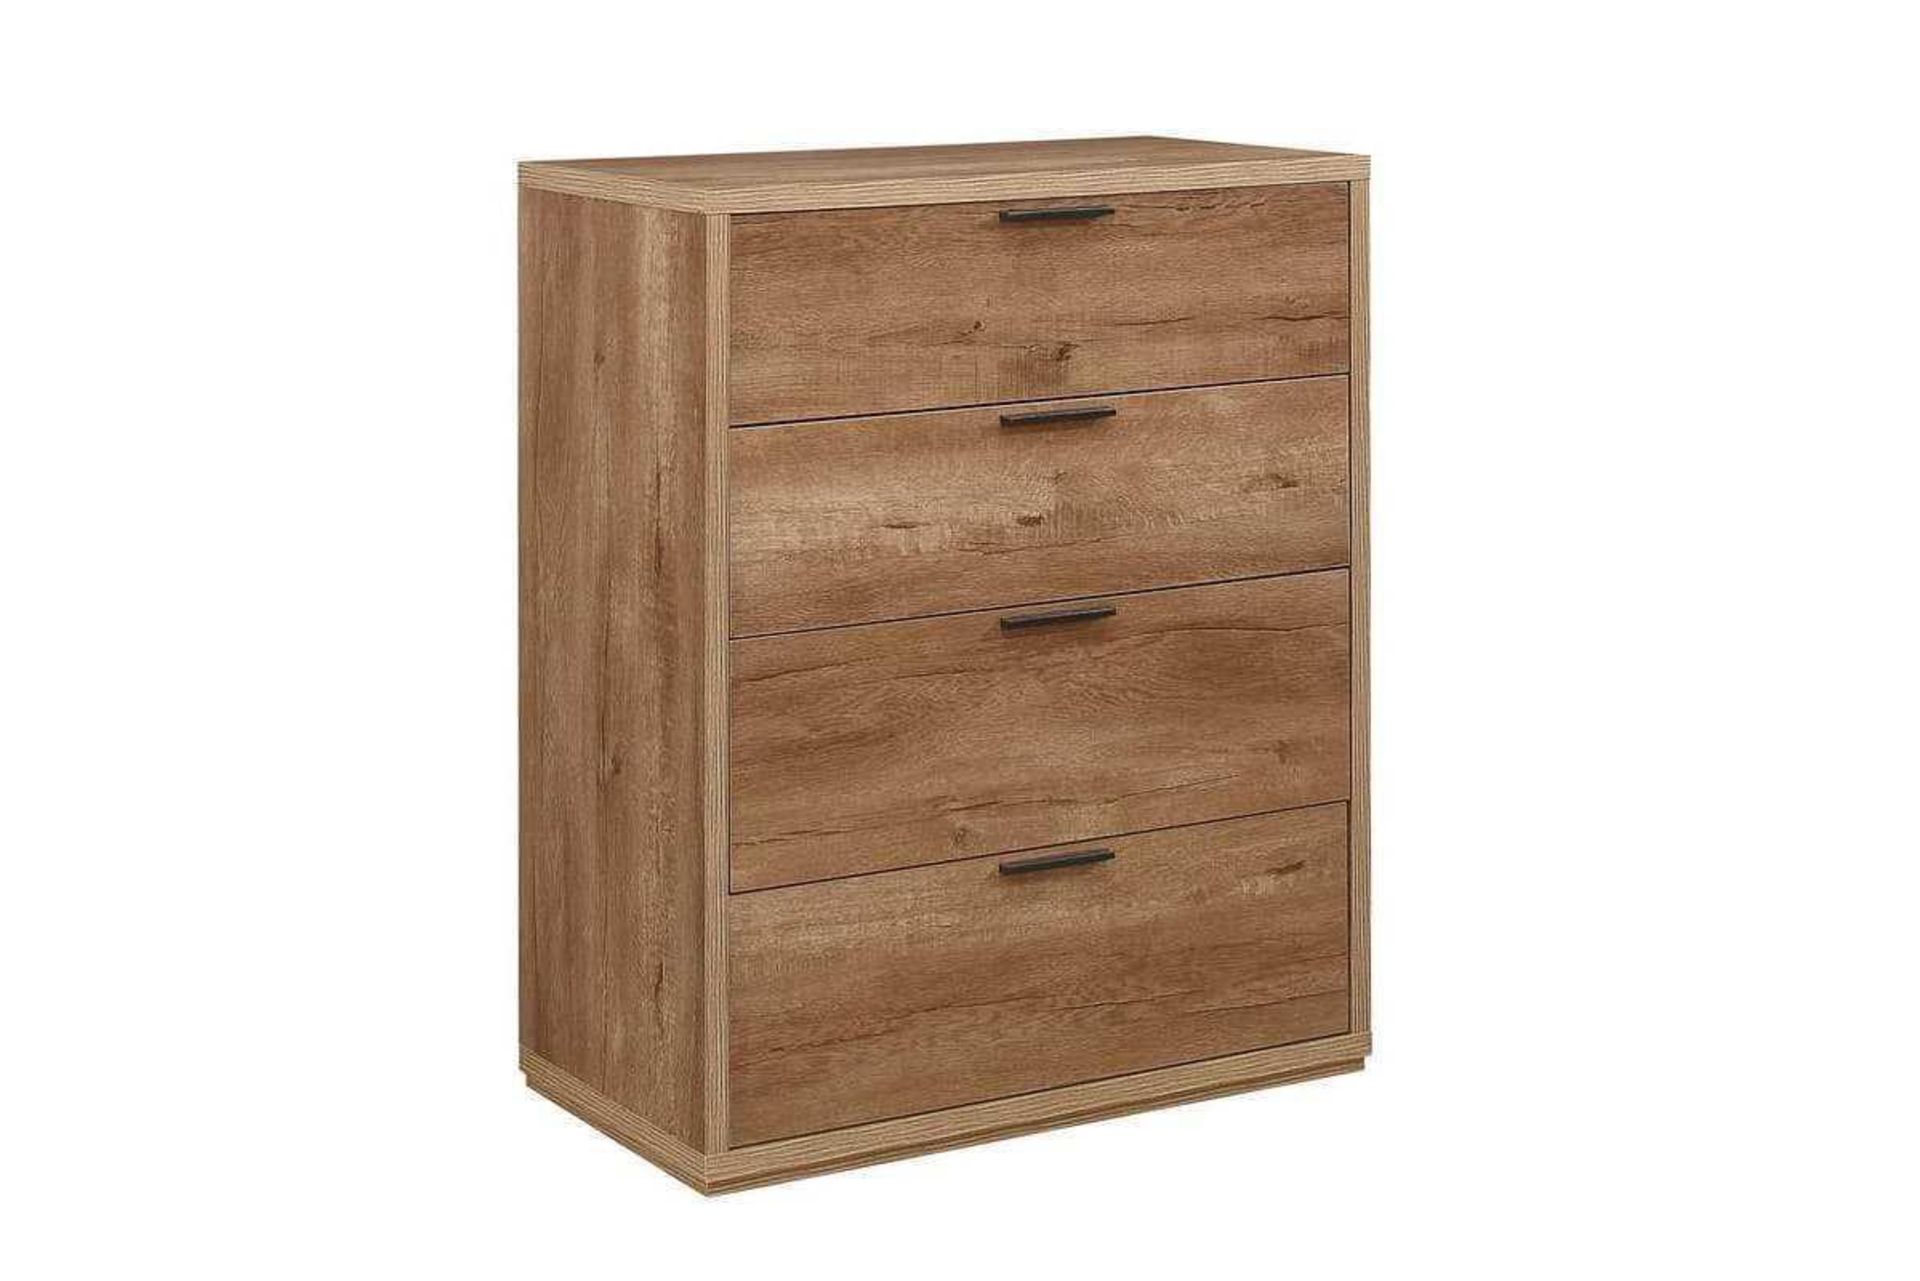 RRP £170. Stockwell 4 Drawer Chest In Rustic Oak